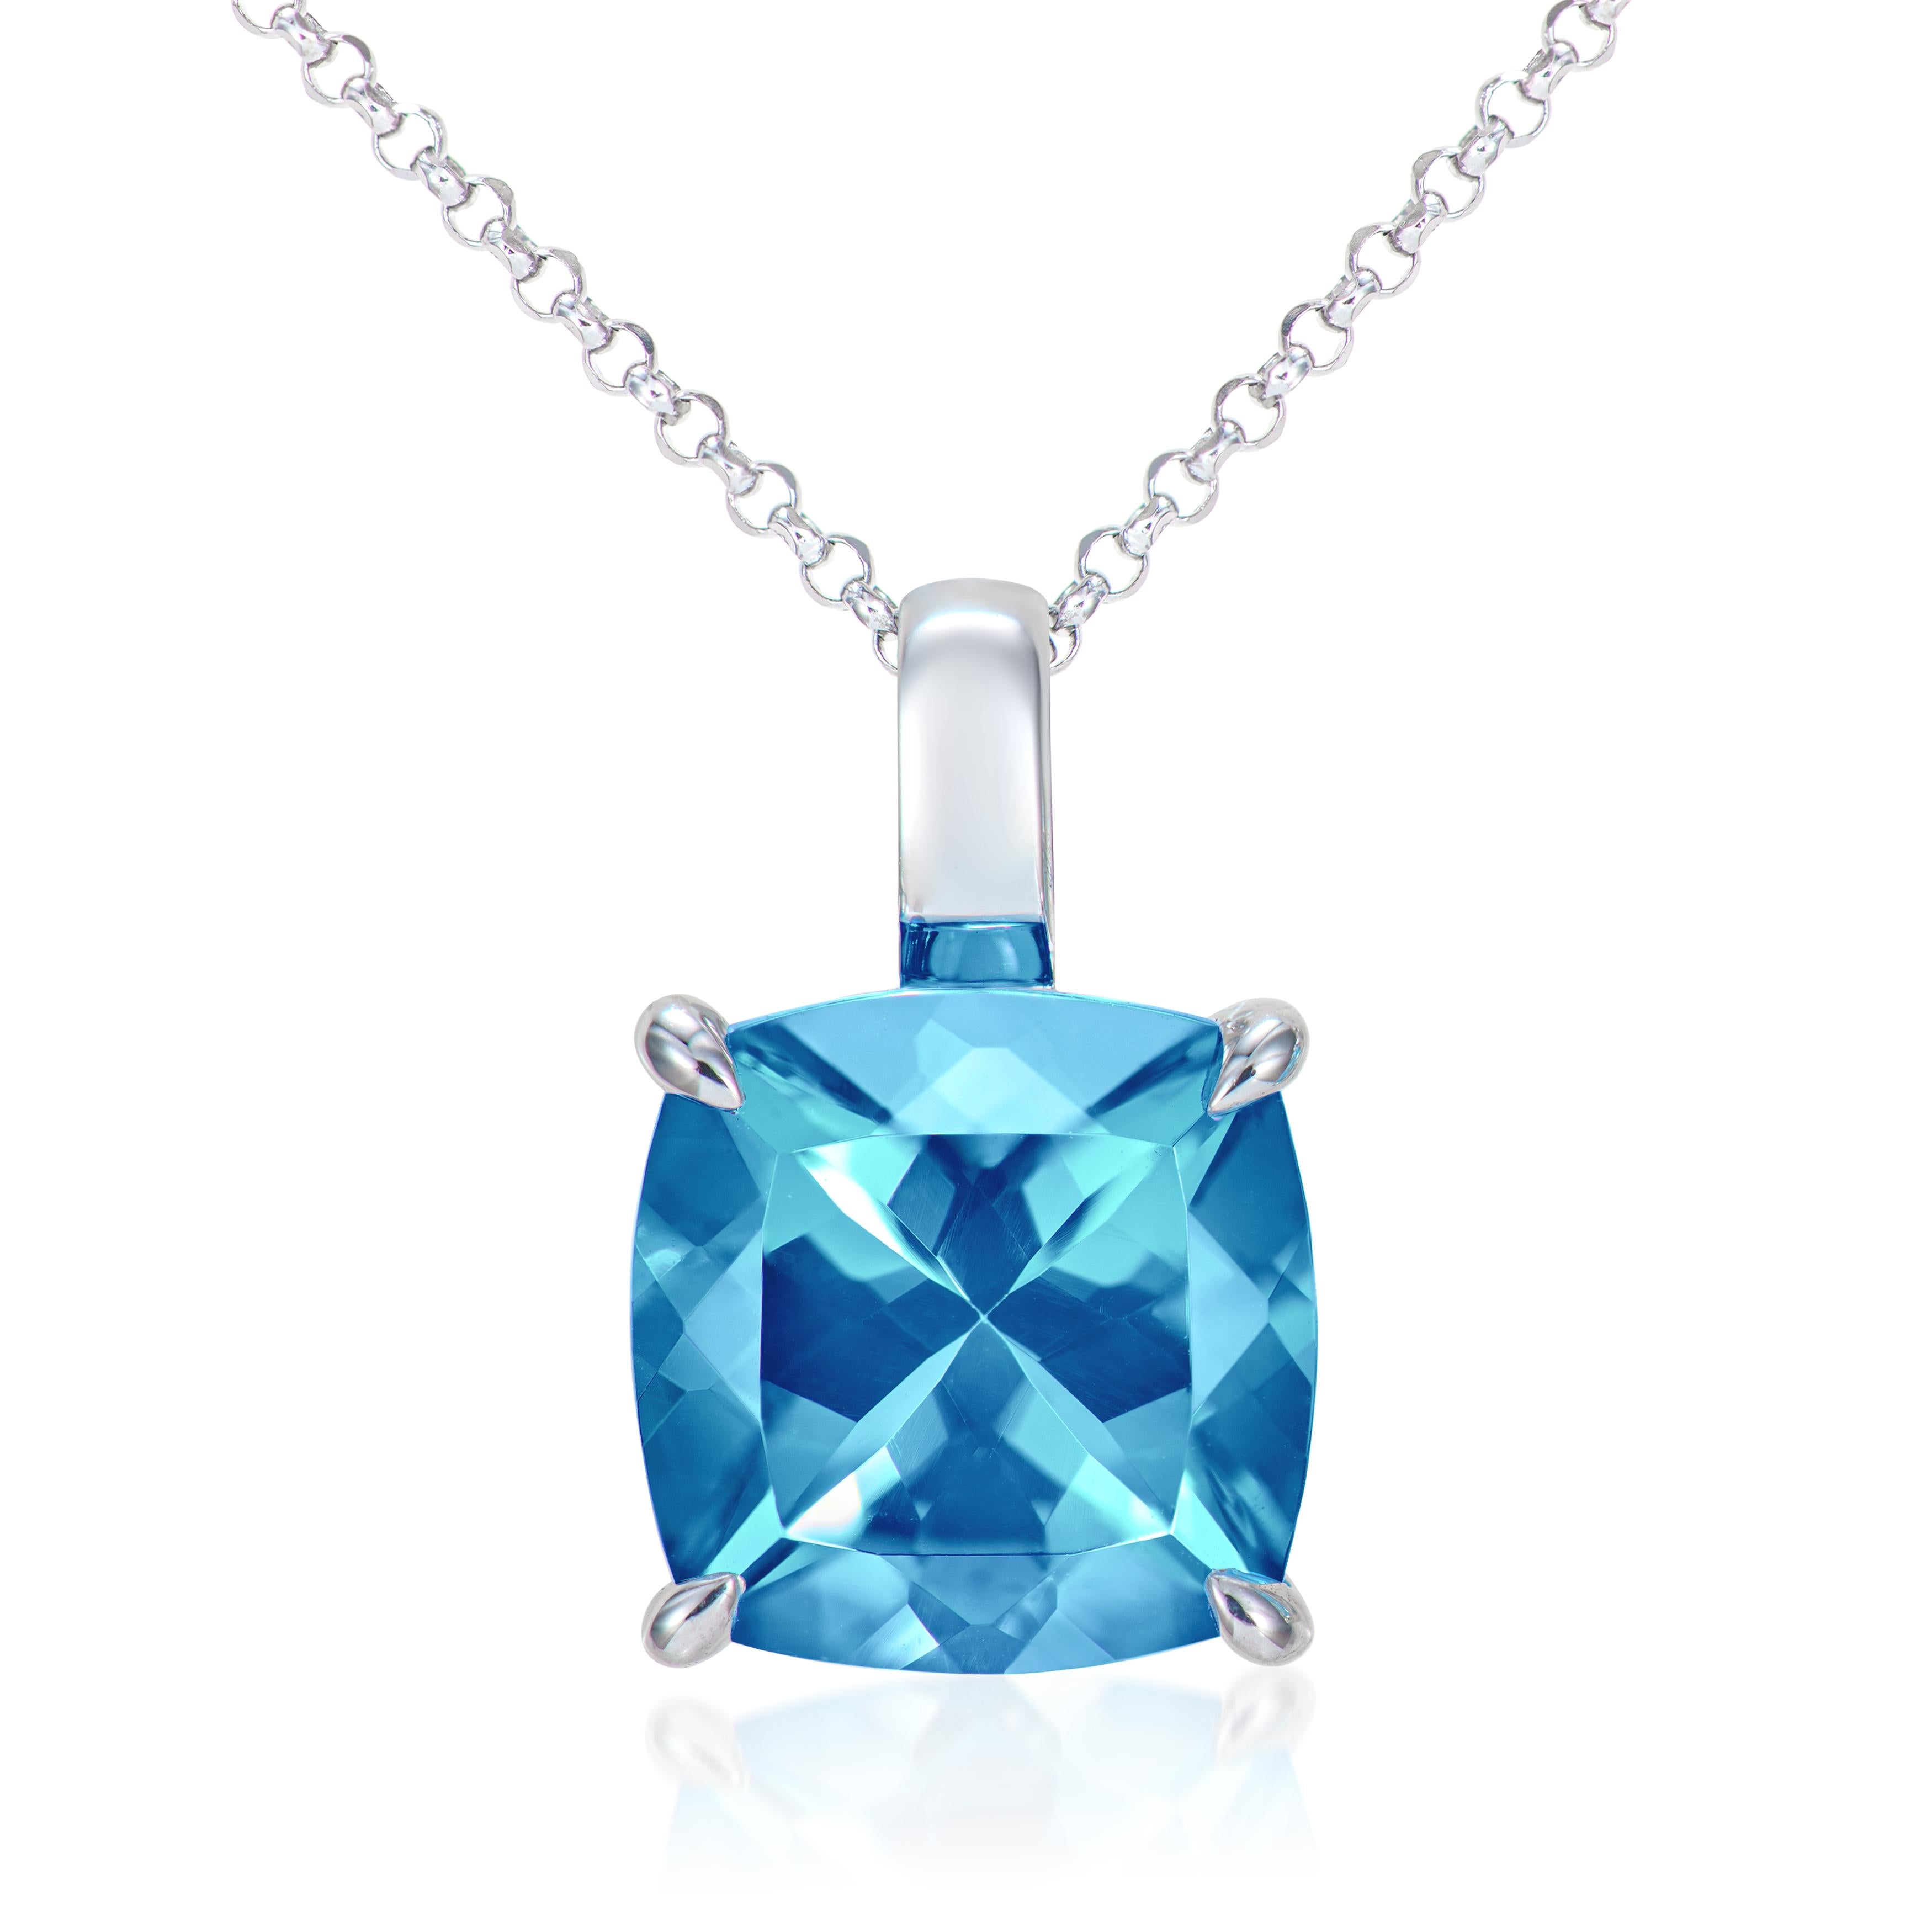 Presented A lovely collection of gems, including London Blue topaz Rhodolite, Peridot, Amethyst, Sky Blue Topaz and Swiss Blue Topaz is perfect for people who value quality and want to wear it to any occasion or celebration. The White gold London